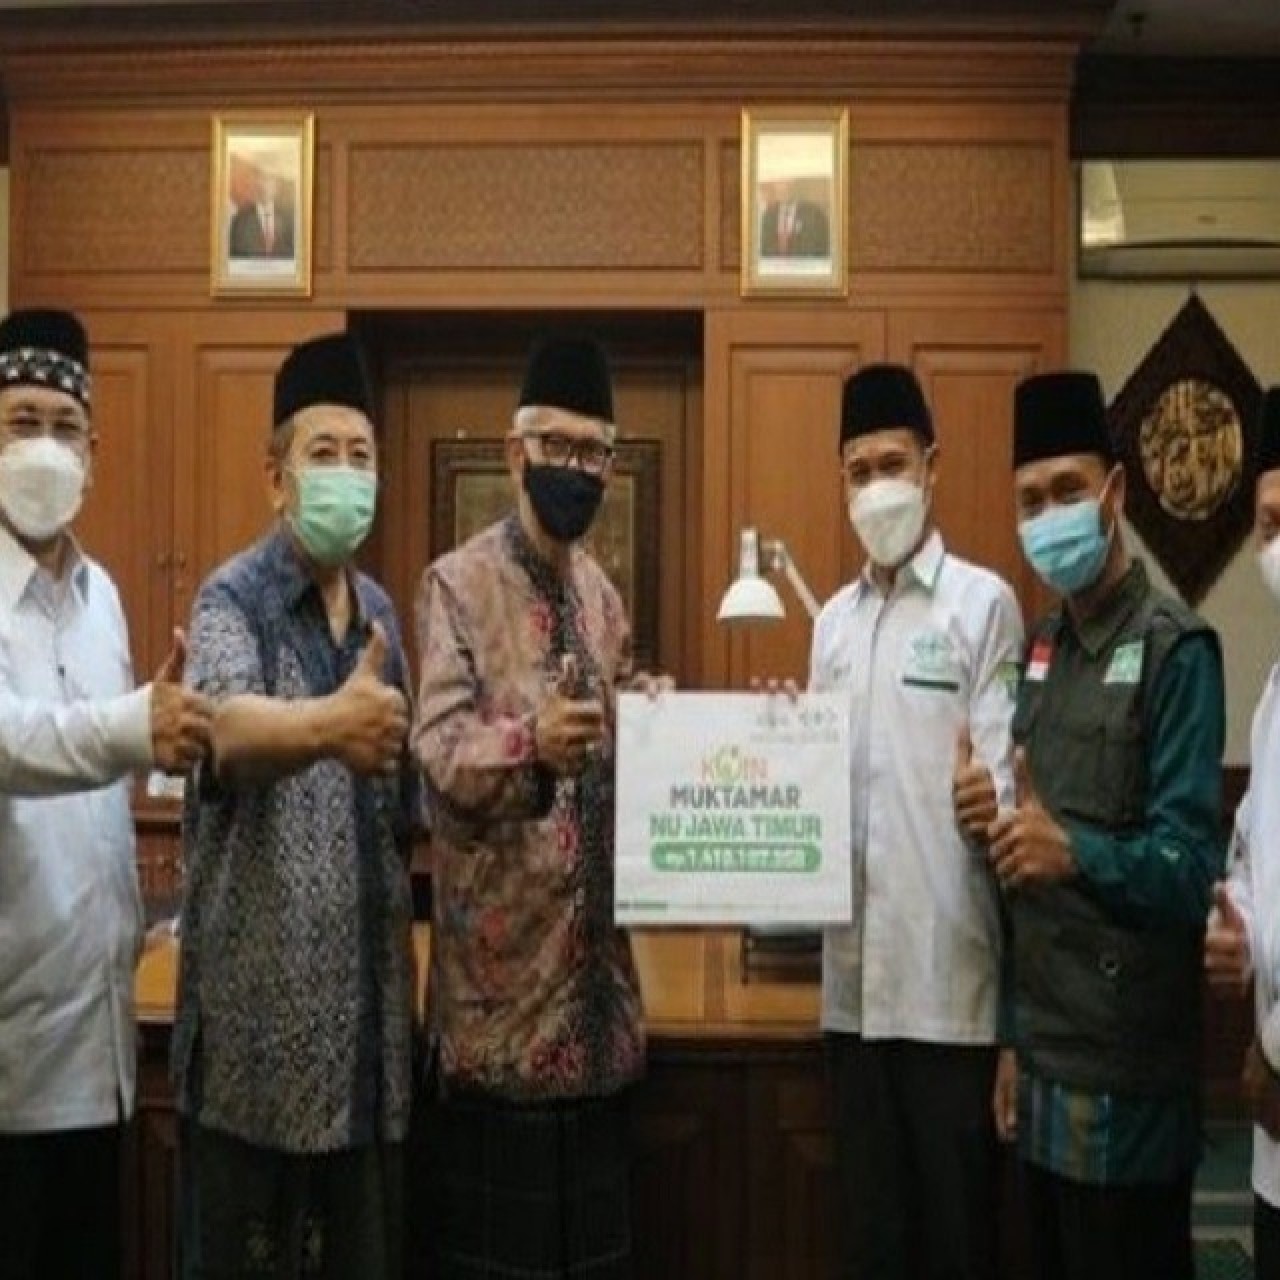 Receiving 1.4 billion from East Java, donations for NU Congress amounted to 6.1 billion